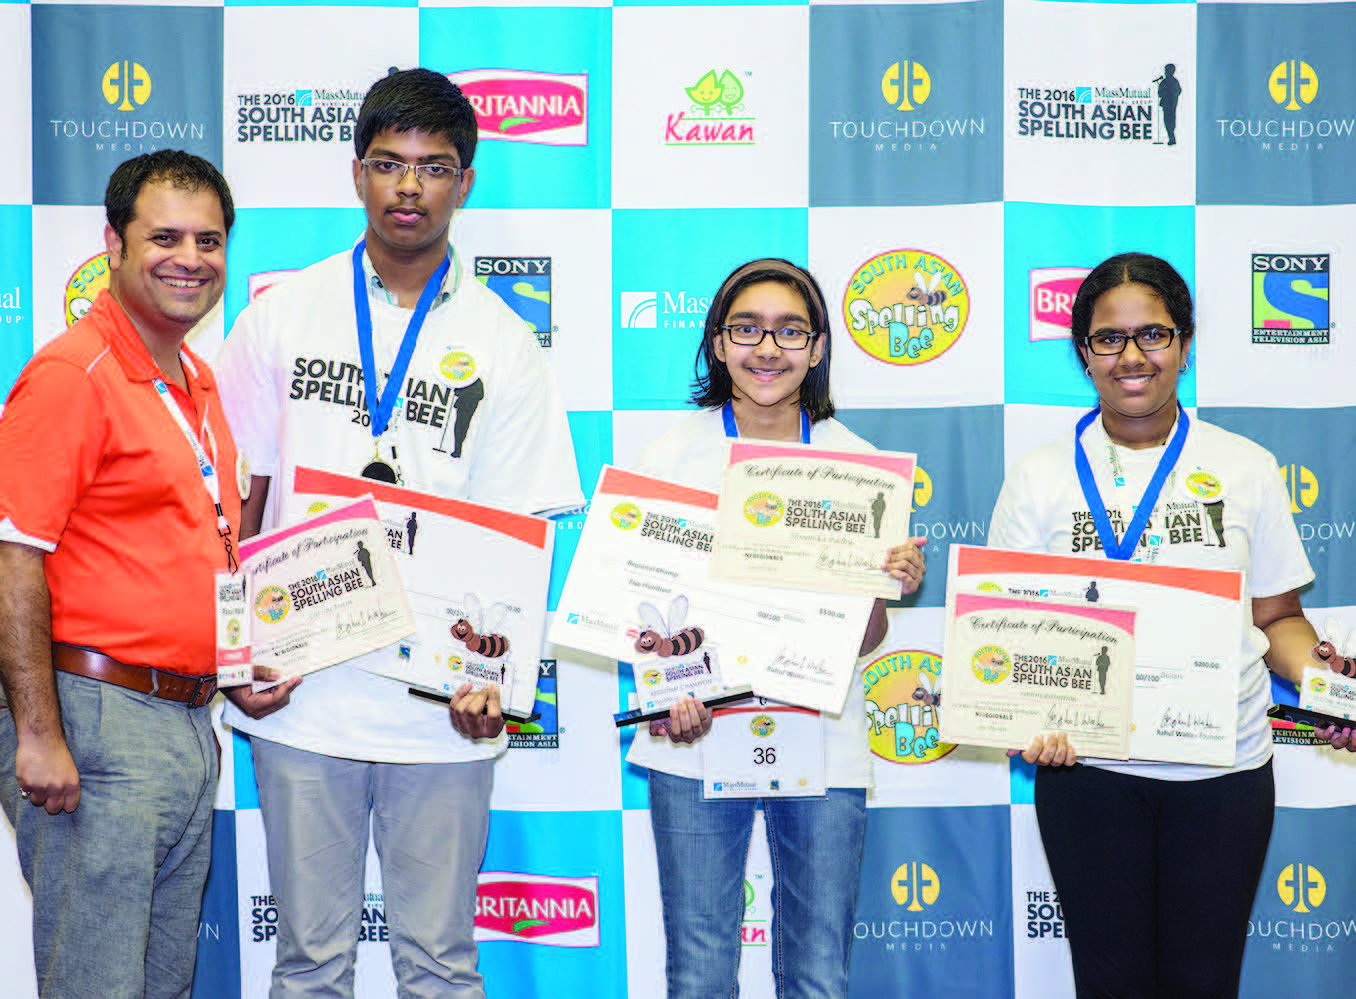 New Jersey Winners (Left to Right): Rahul Walia, founder of The MassMutual South Asian Spelling Bee, Christy Jestin, first runner-up, Shruthika Padhy, regional champ, and Roshni Kainthan, second runner-up.